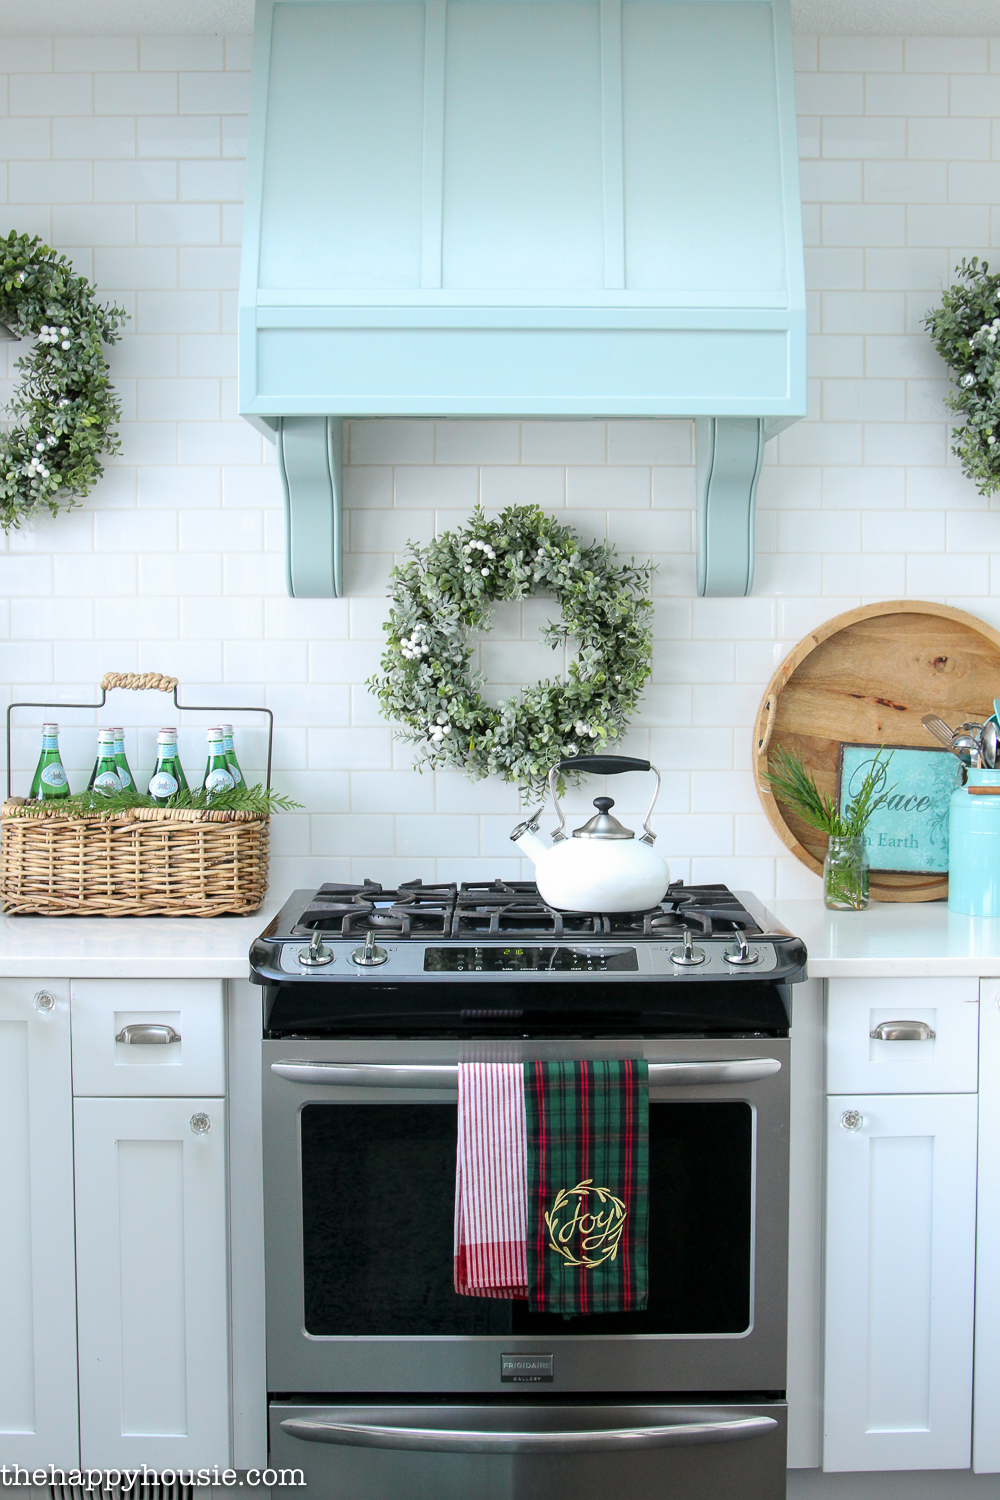 Pops of holiday greenery in the kitchen.